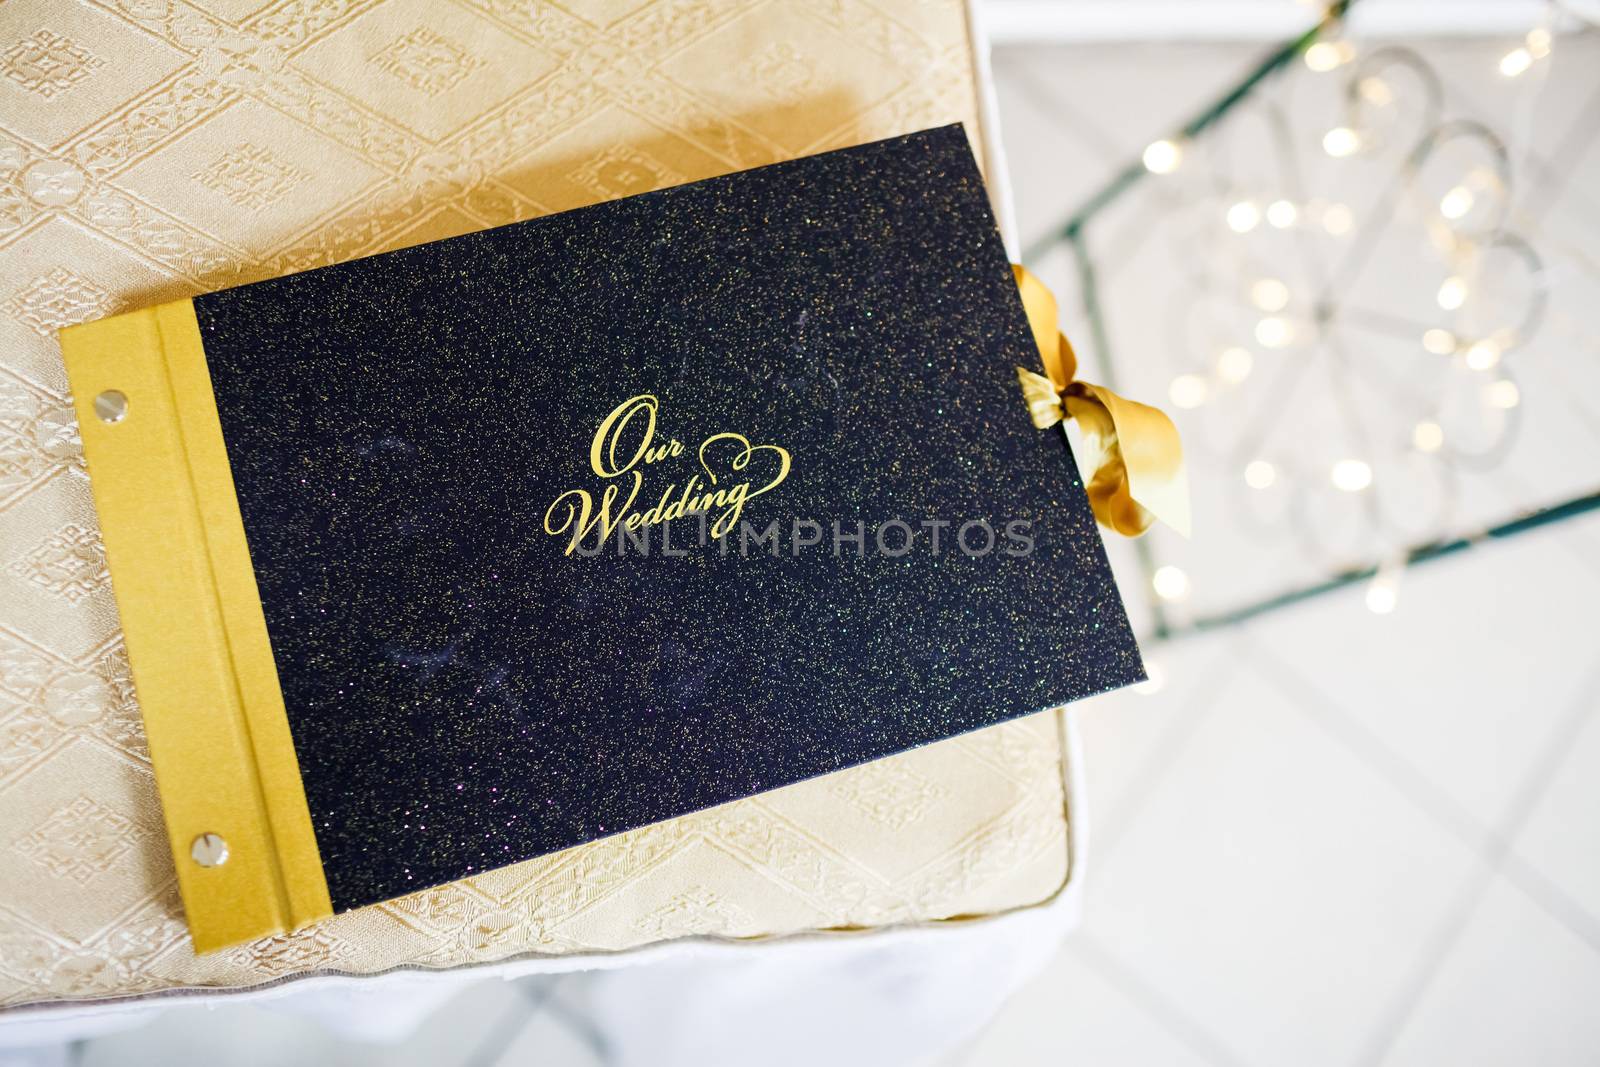 Our wedding photo album decorated with gold, a photographic story of the day.